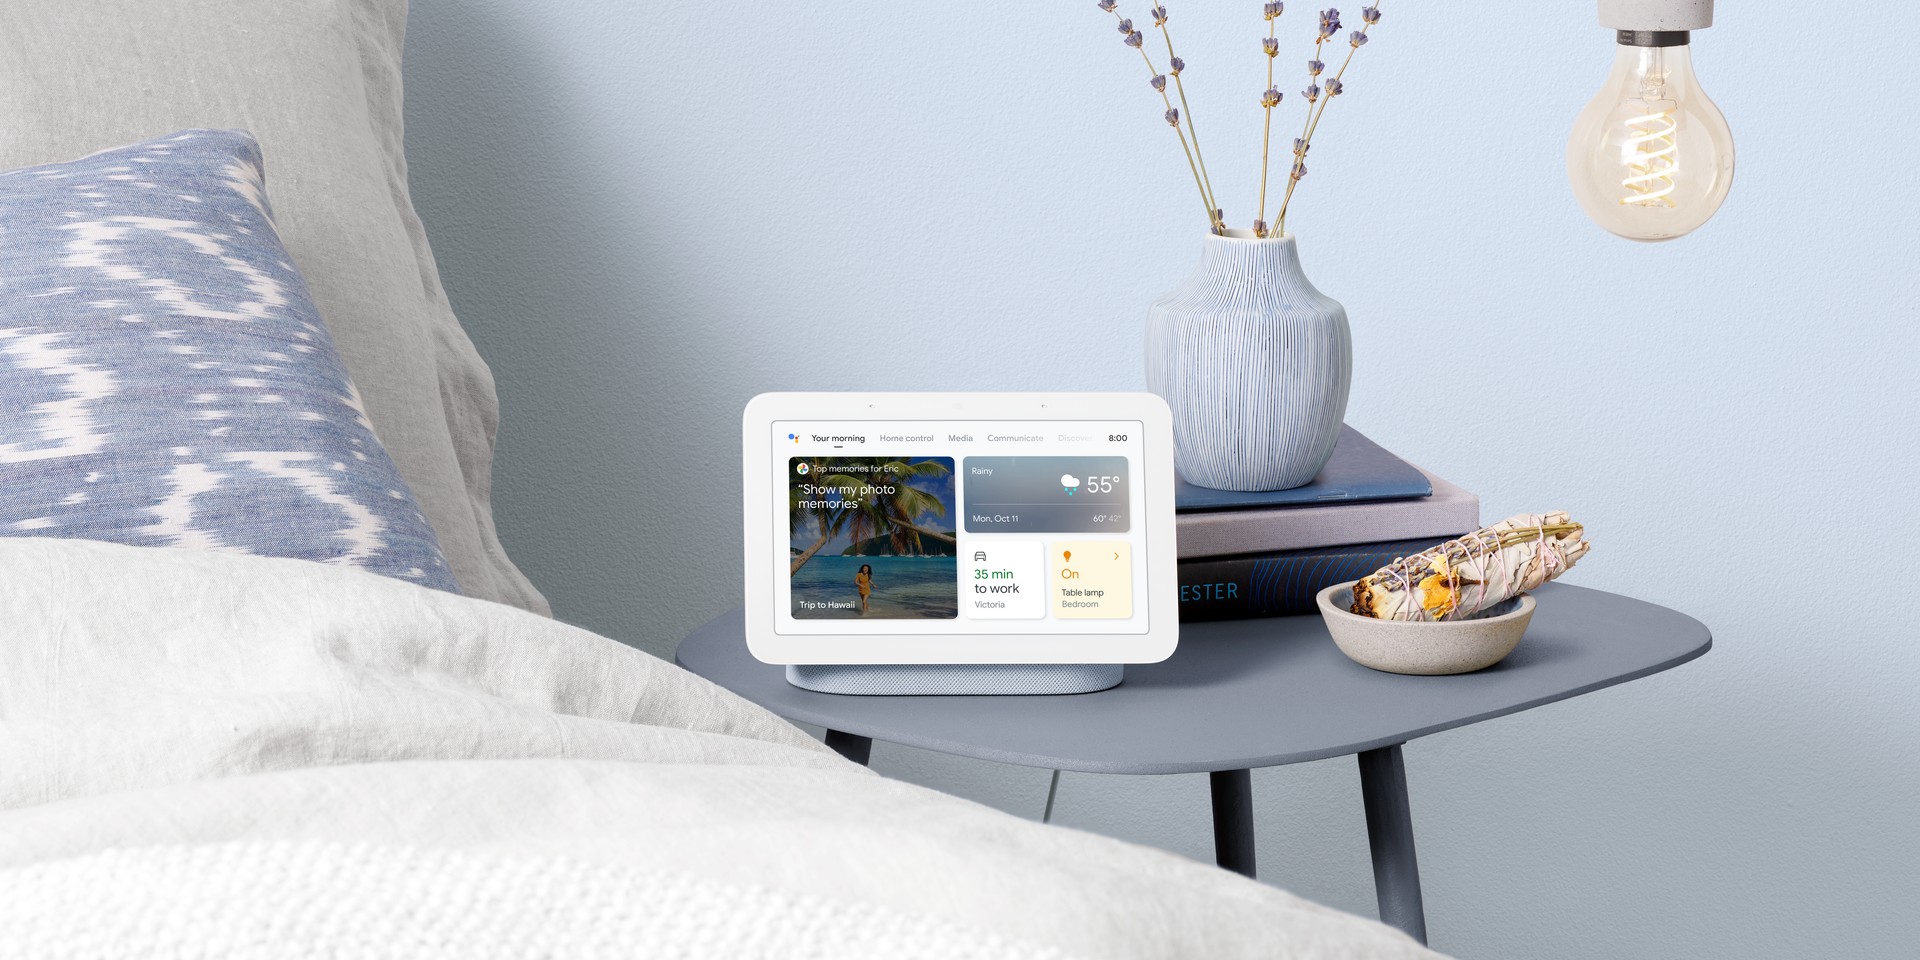 We slept with the Google Nest Hub beside us. Here’s what we learnt - review
